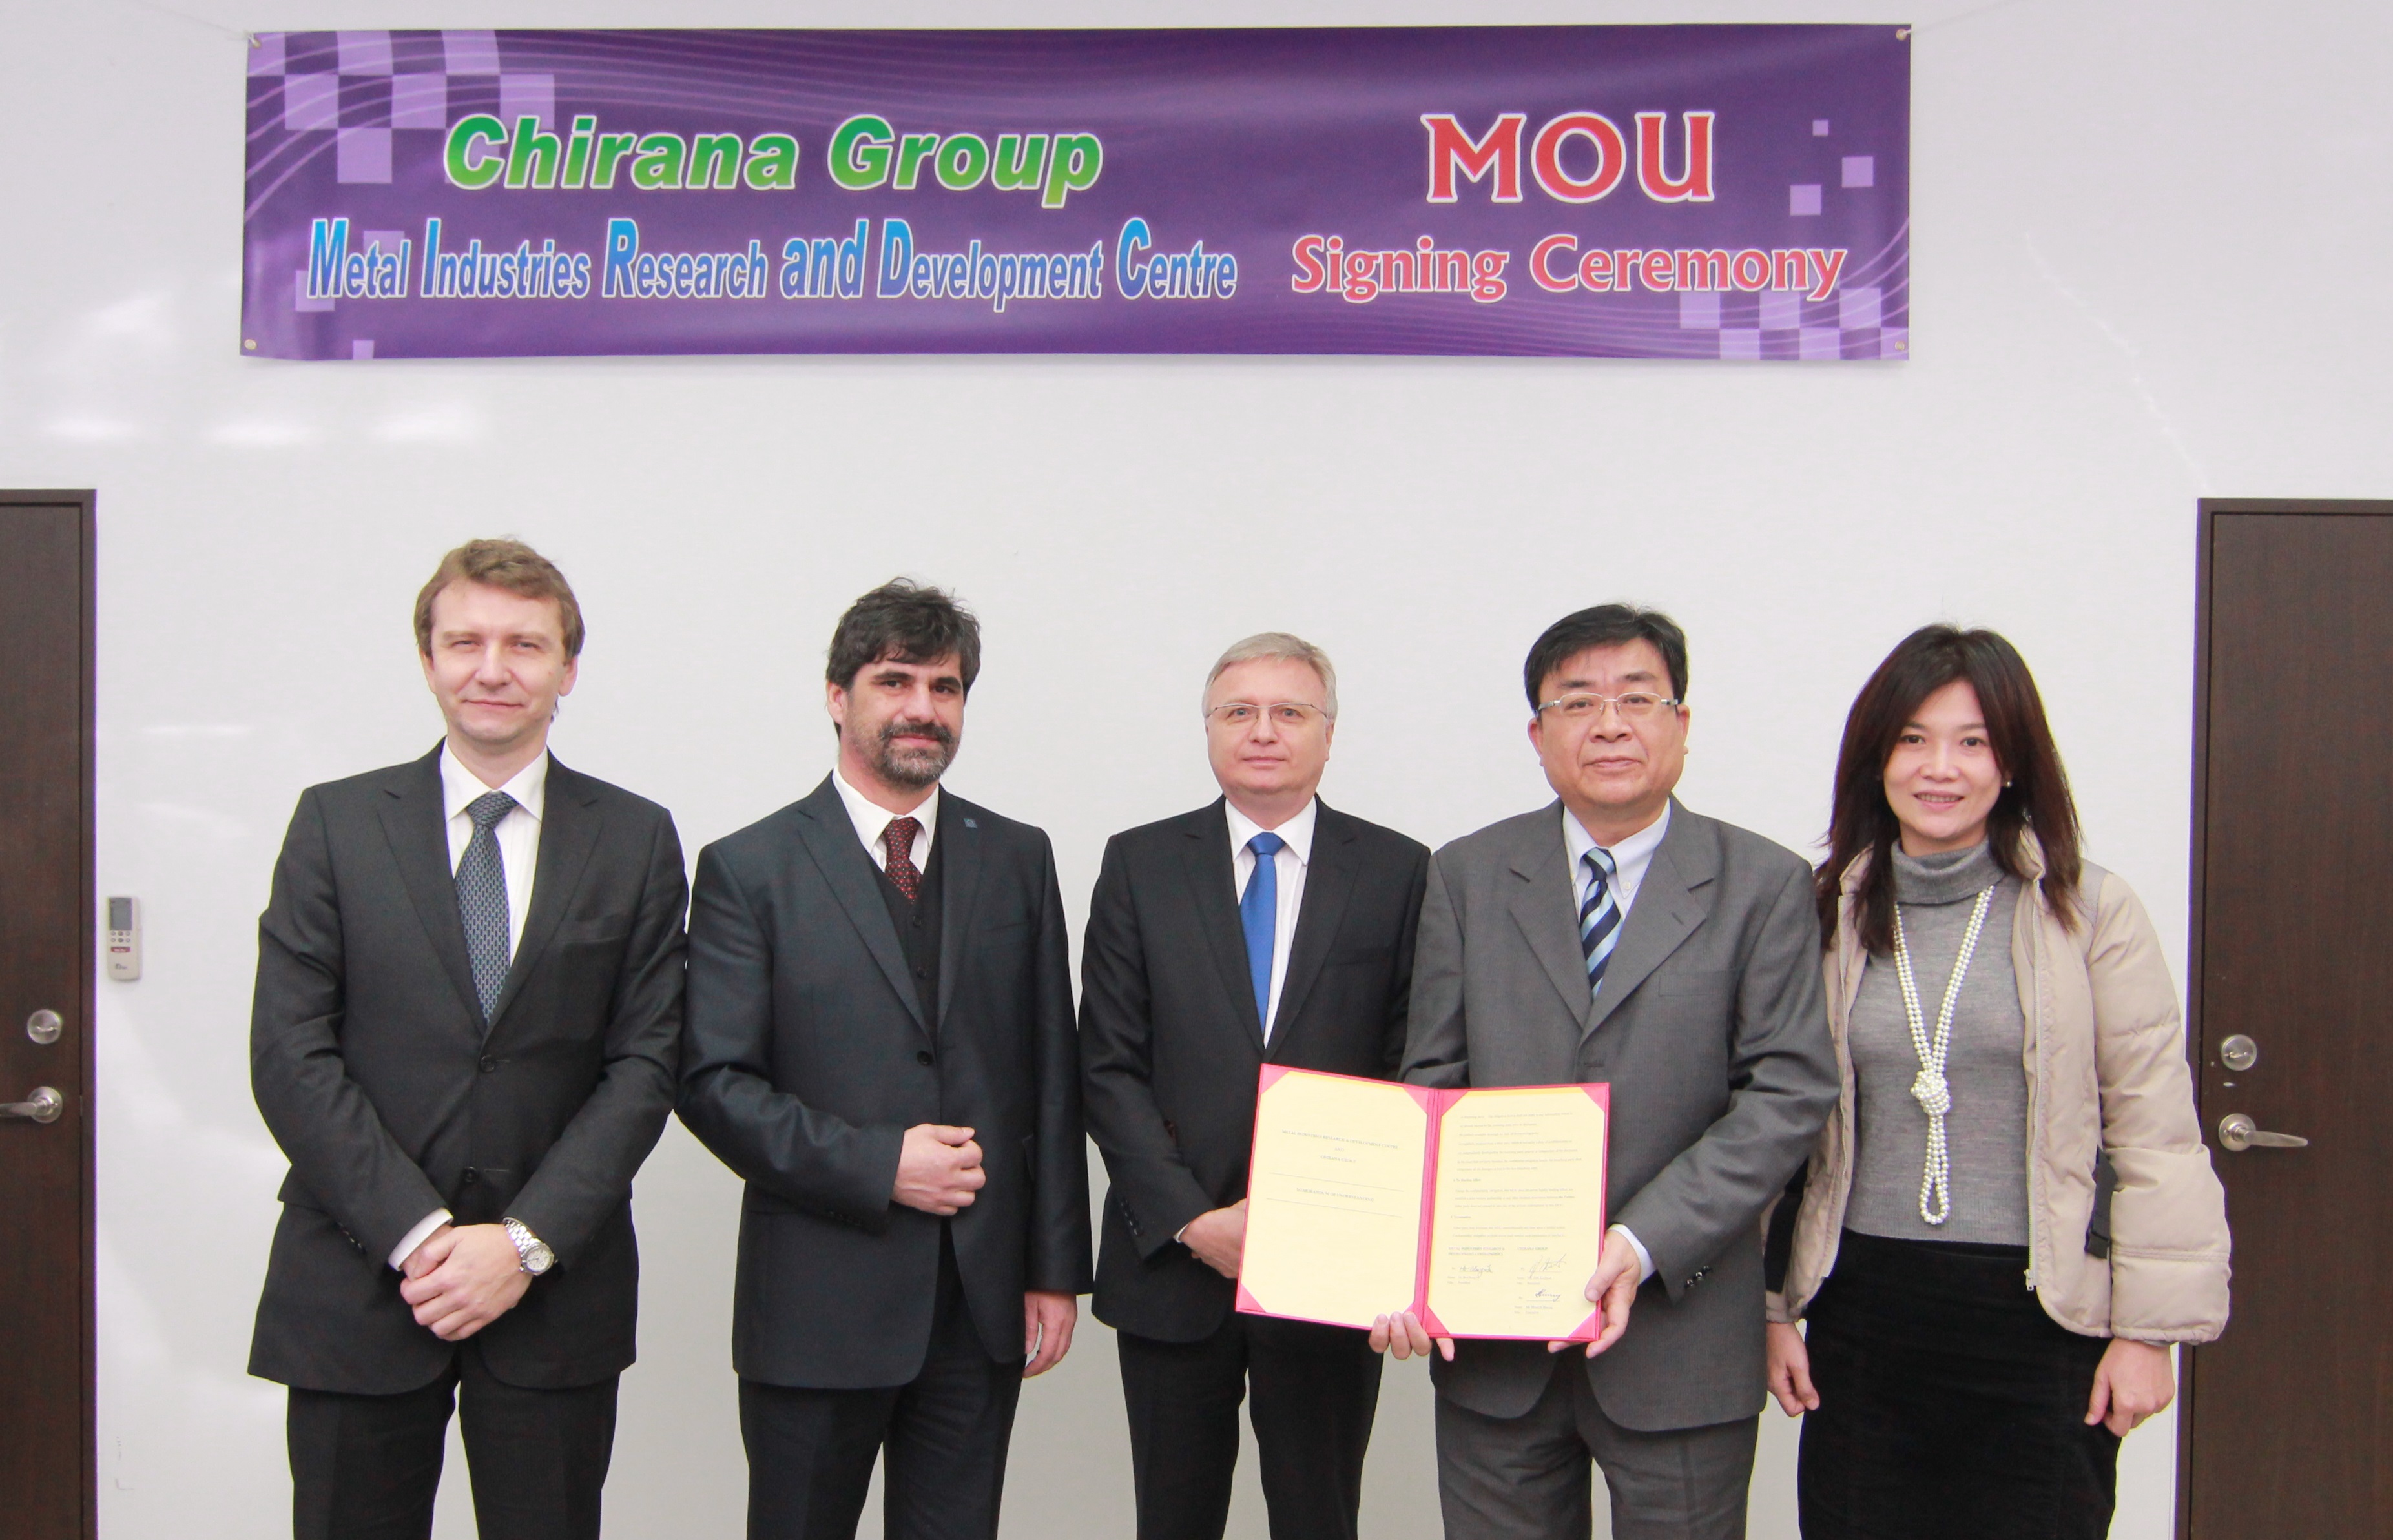 (from left) Chirana’s CEO, Henrich Hercegu, and chairman, Jiri Kpecek, the Slovakian Embassy, Michal Kovac, and MIRDC’s CEO, C.H. Fu, at the MOU signing ceremony in late January 2014